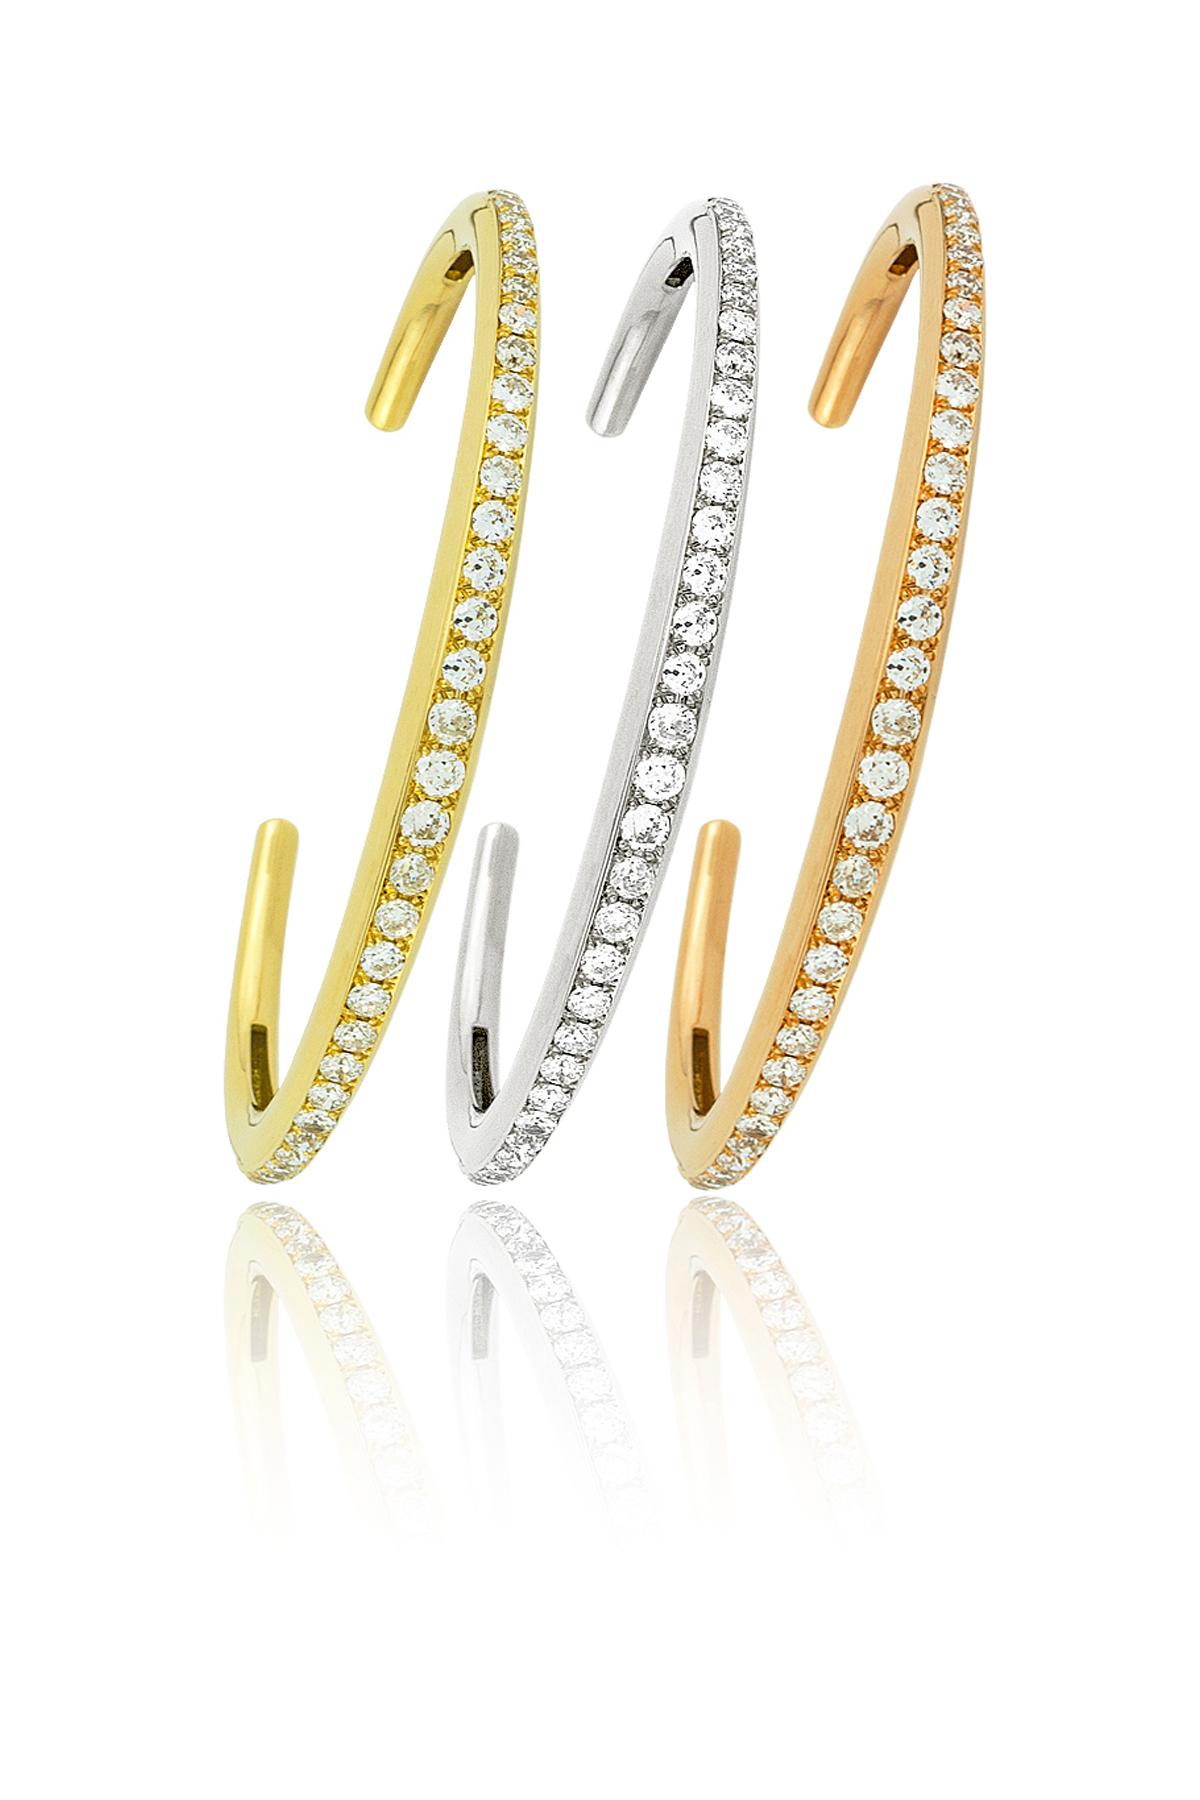 18K White, Yellow and Rose Gold & Diamond Bangles; 99 Diamonds 7.85ct; signed STEPHEN RUSSELL 